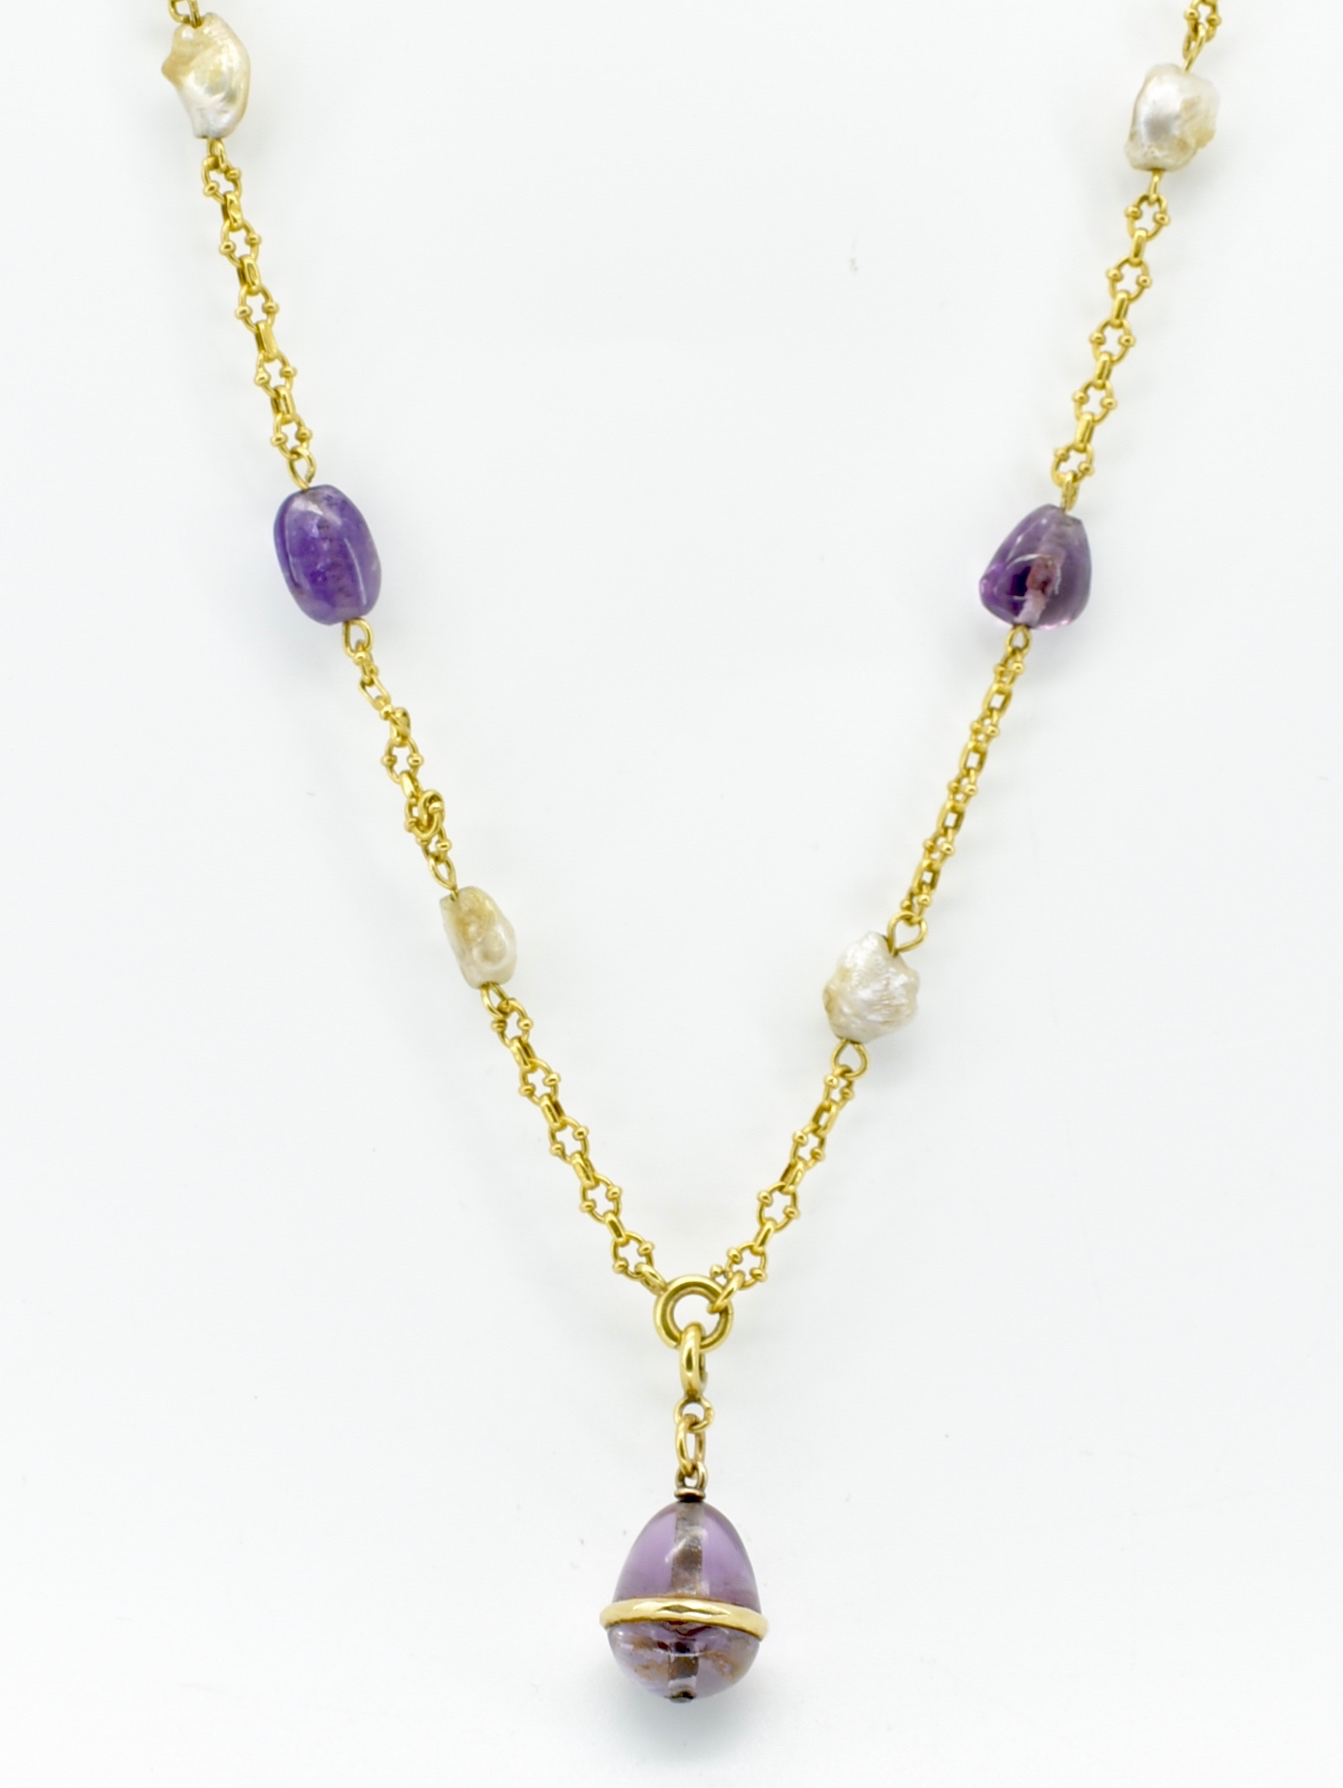 18CT GOLD AMETHYST AND BAROQUE PEARL NECKLACE - Image 5 of 5